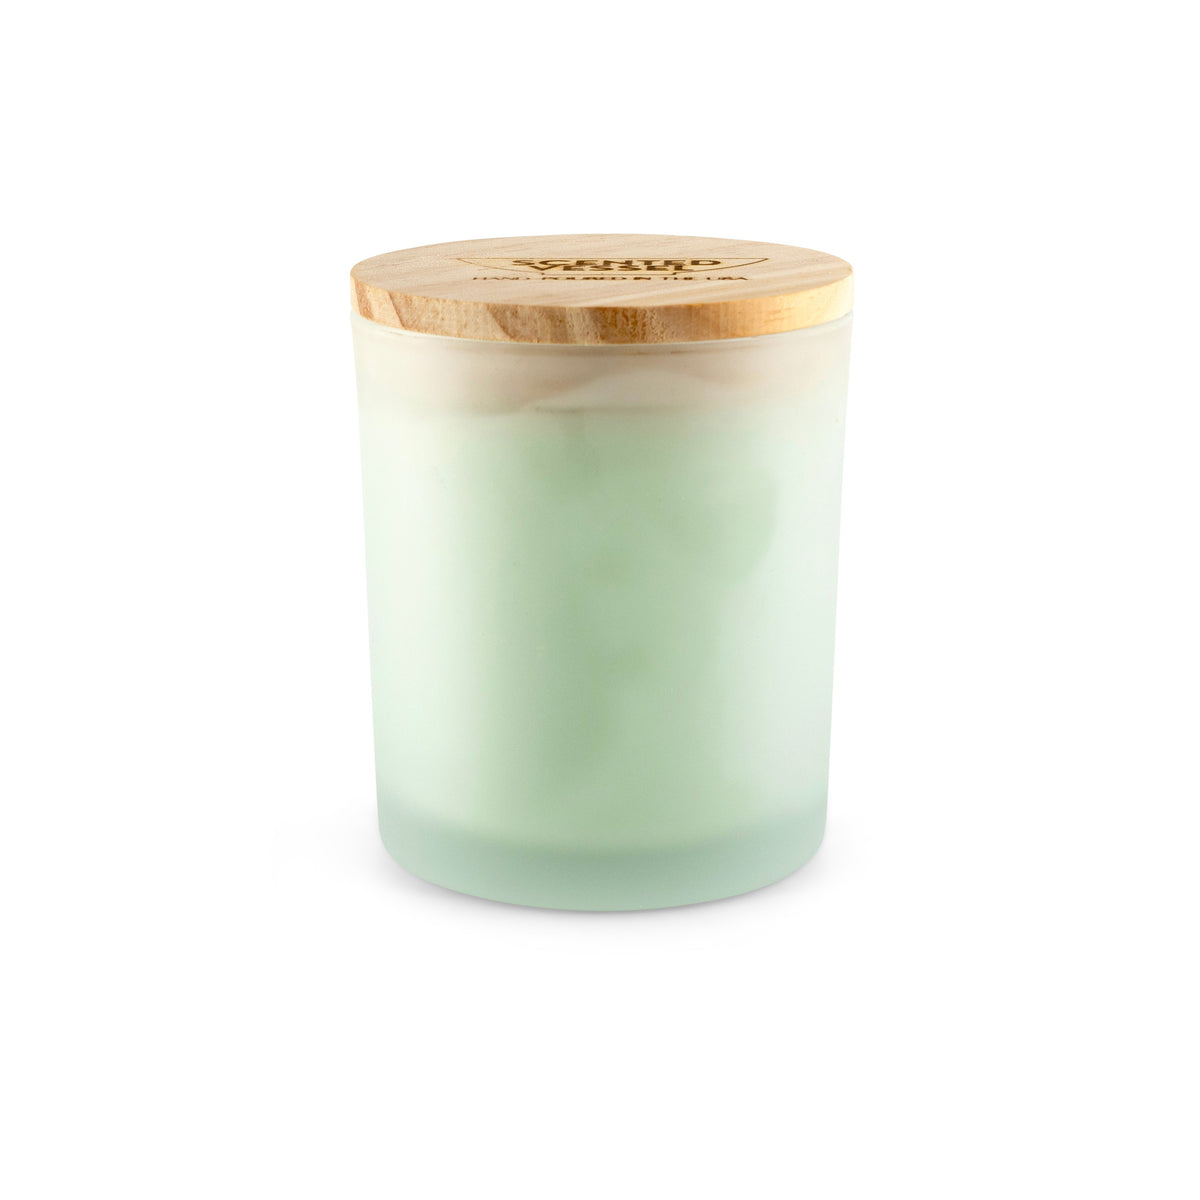 Mistletoe Kiss 7.5oz Frosted Jar Candle by Scented Vessel